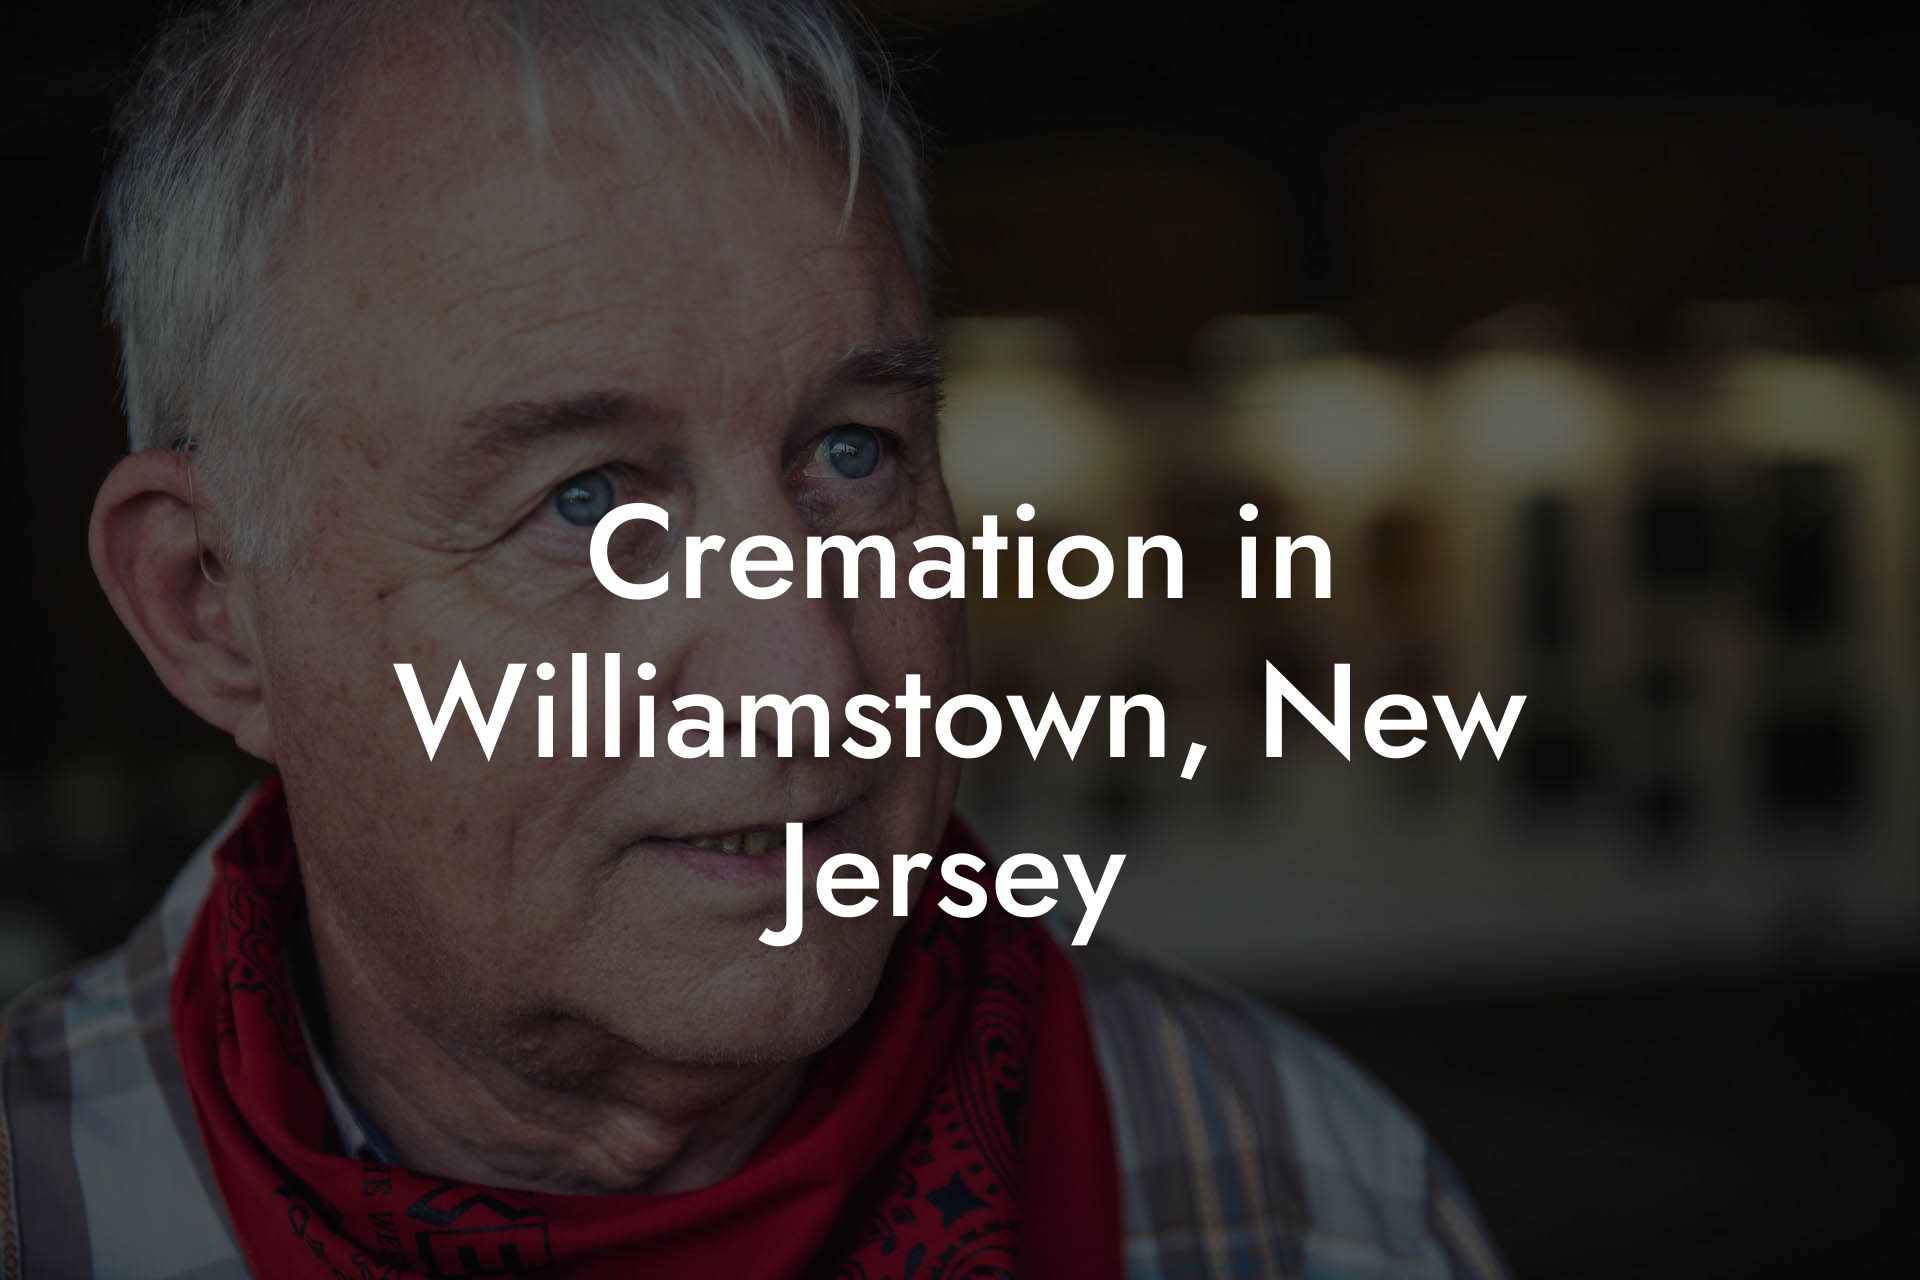 Cremation in Williamstown, New Jersey